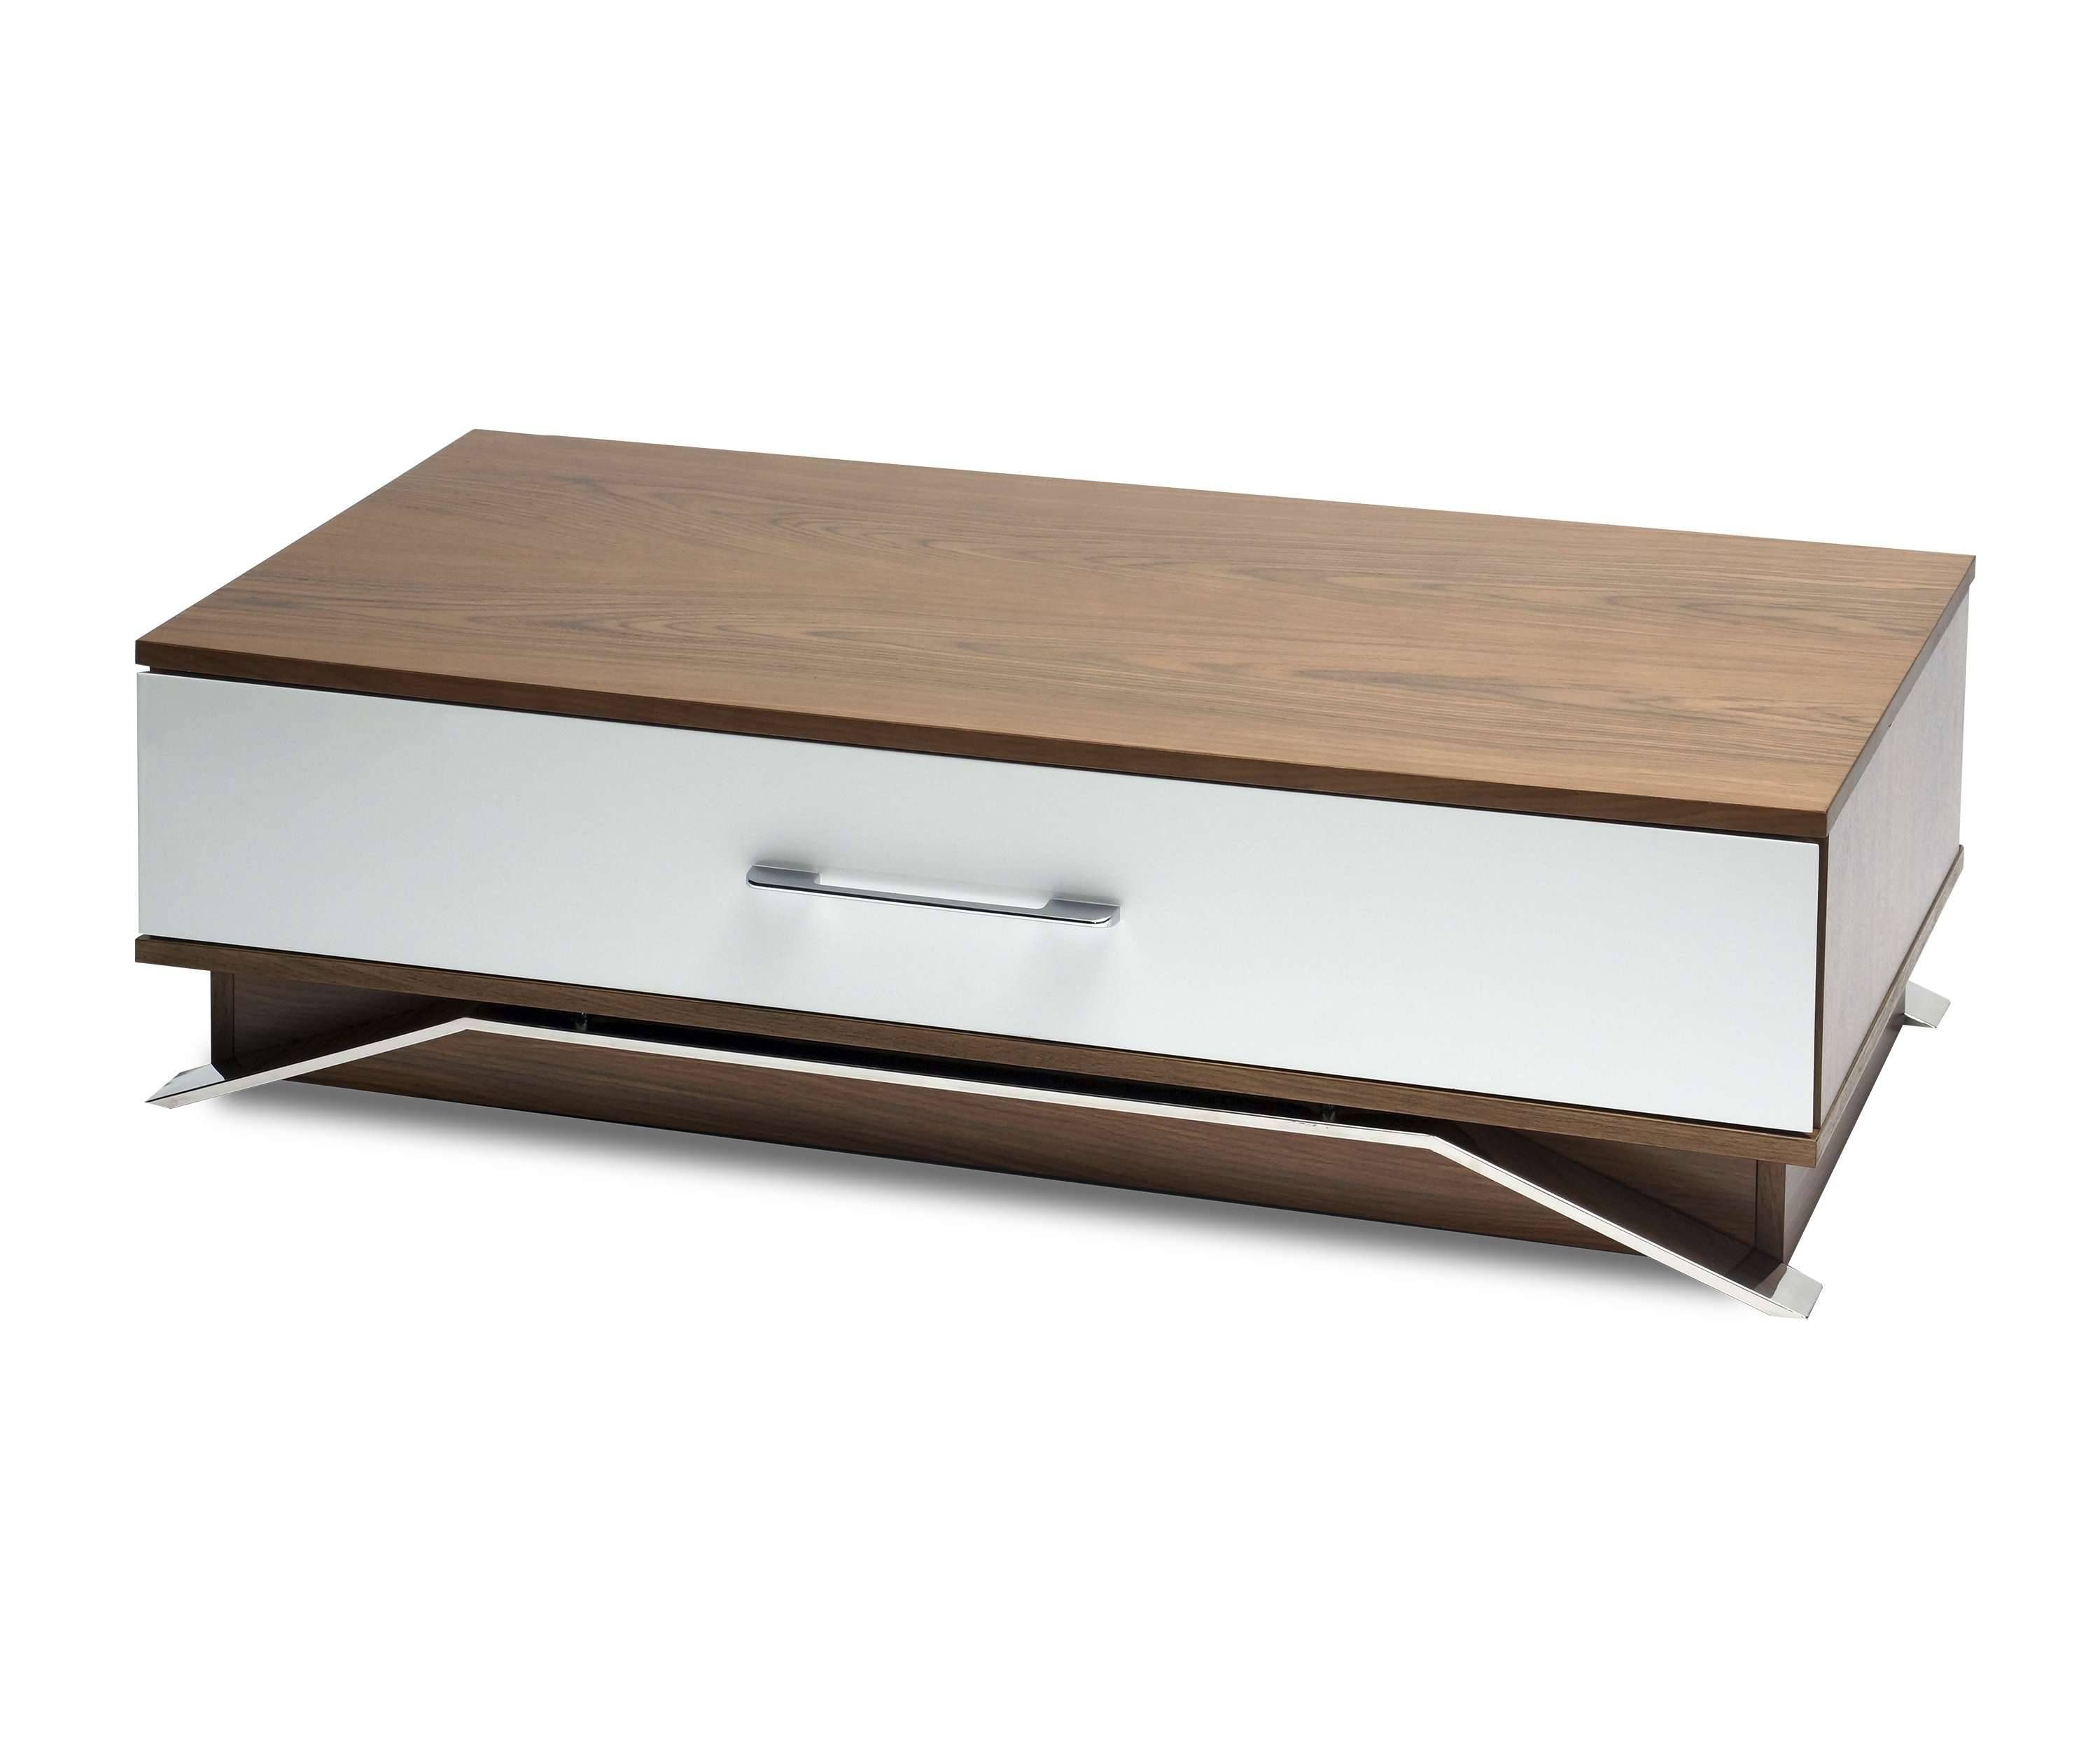 Bordeaux Coffee Table | Zyance Furniture With Bordeaux Coffee Tables (View 5 of 30)